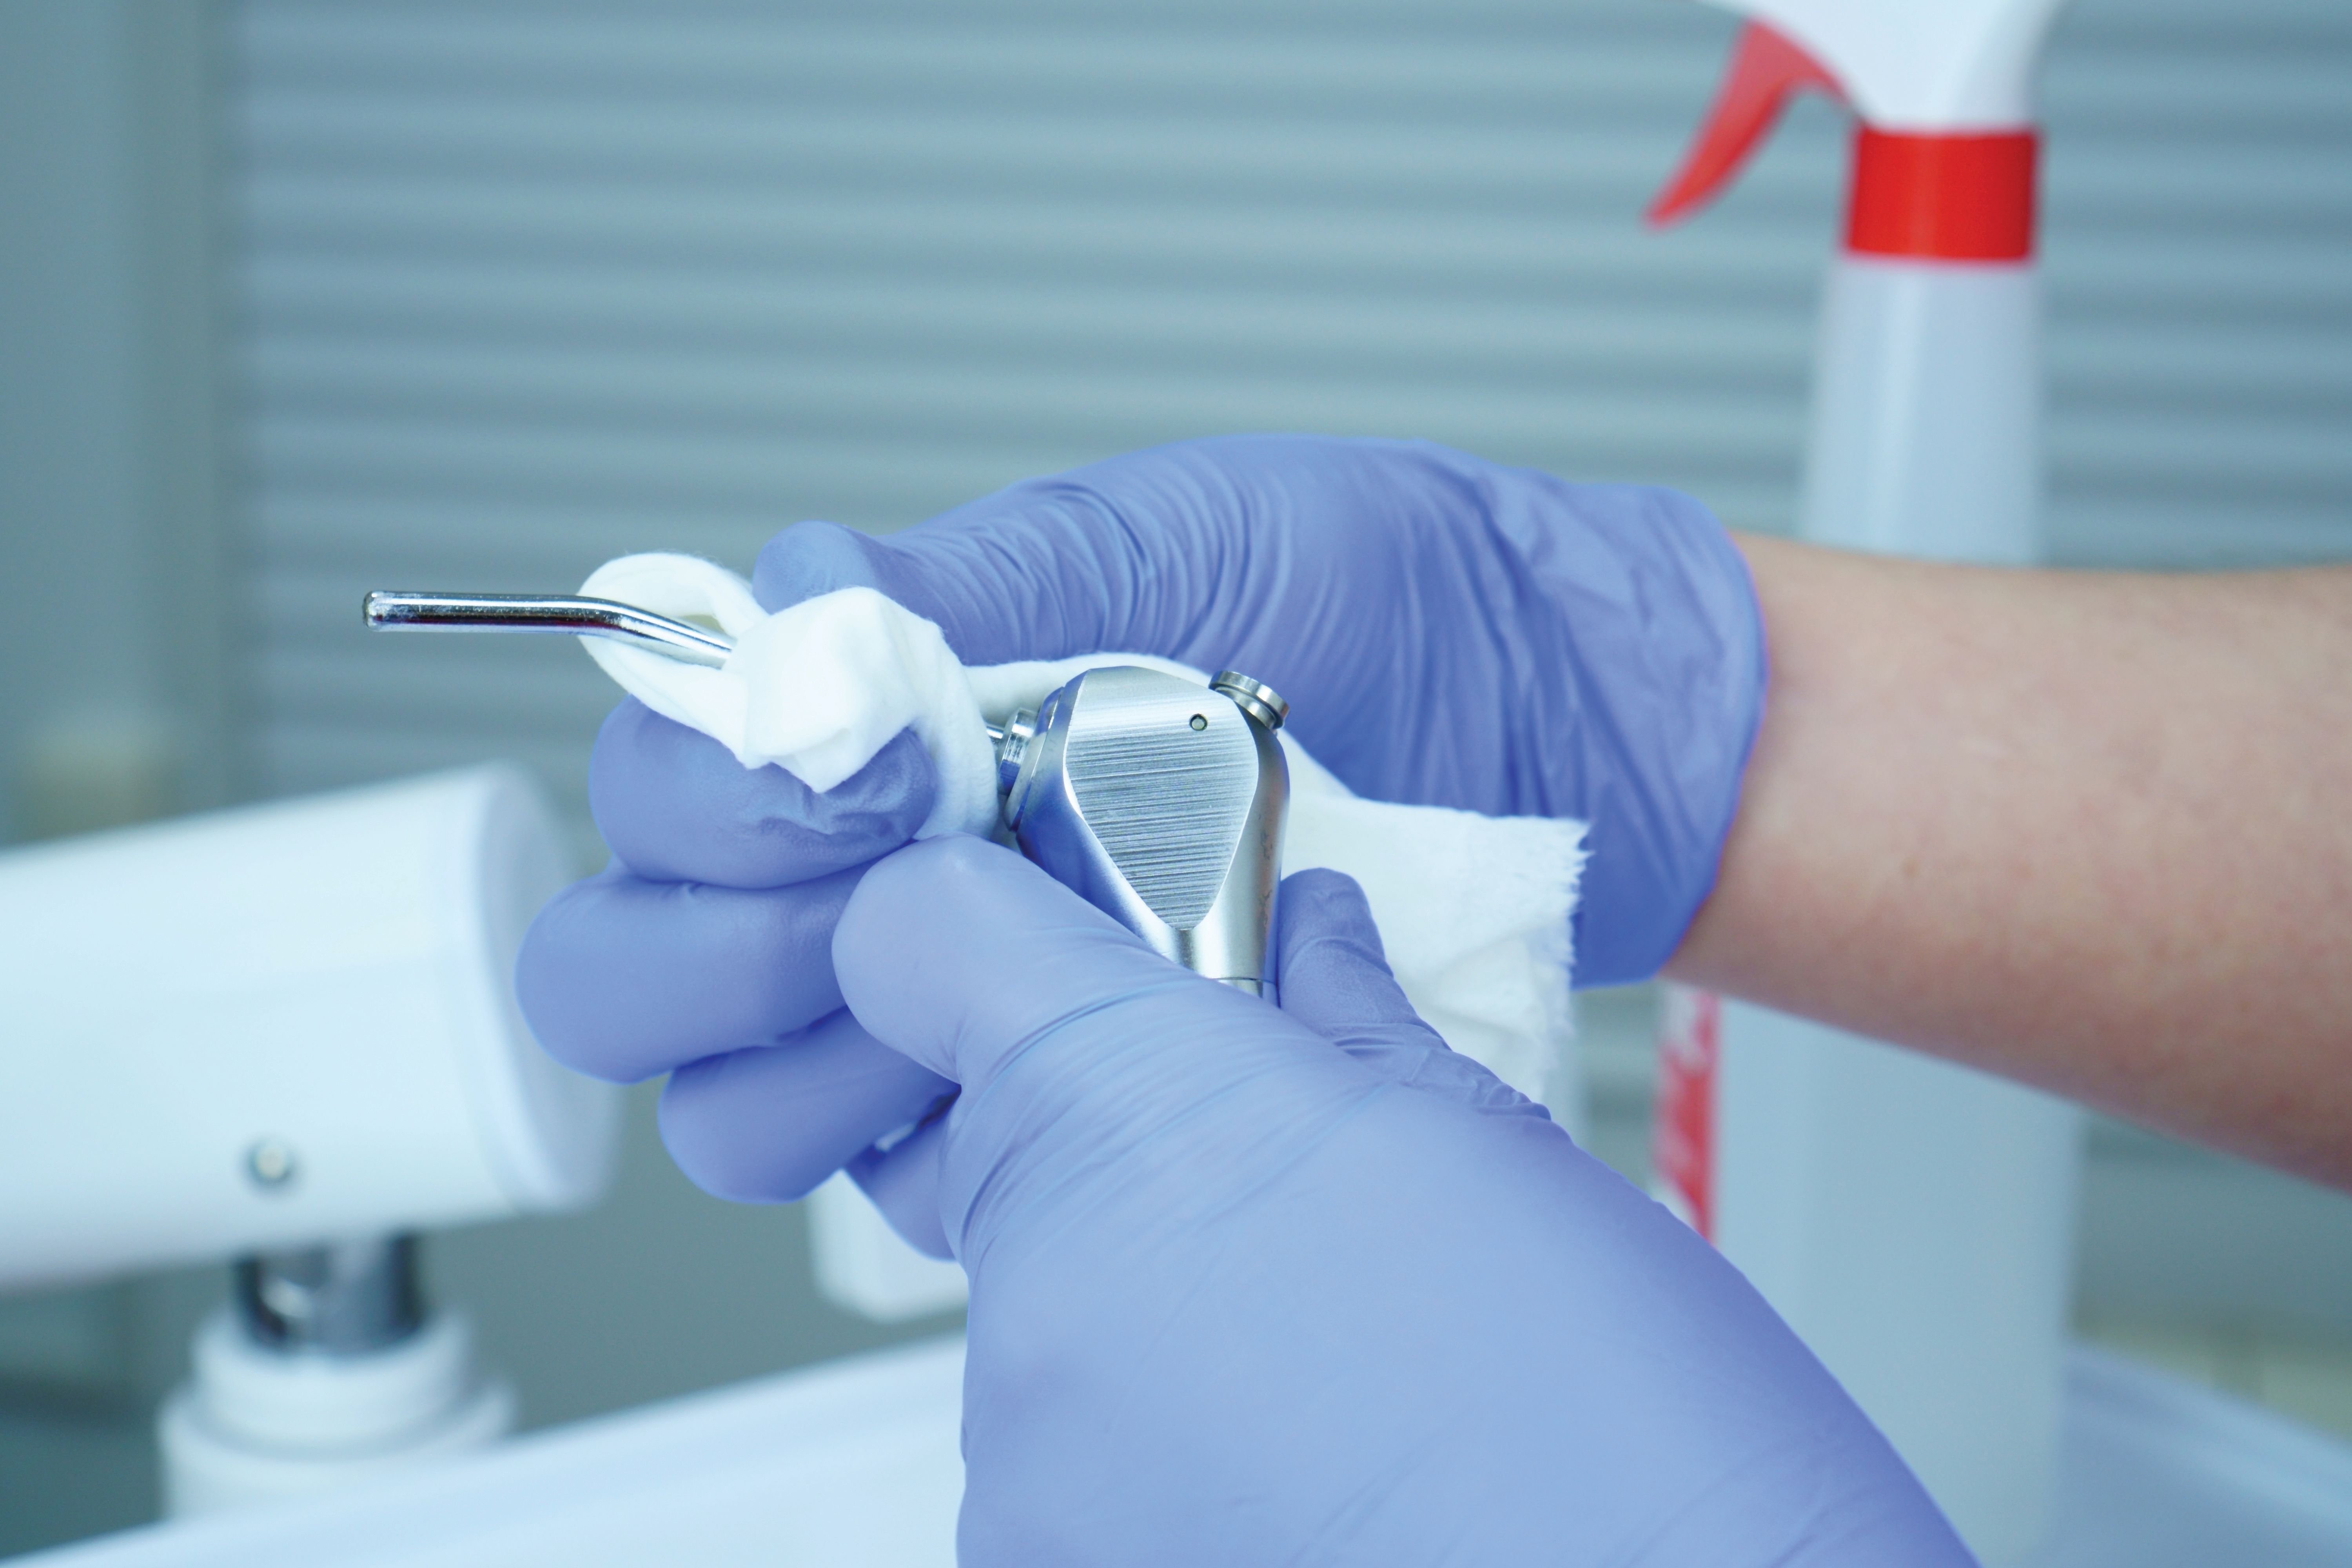 Dental infection control round-up